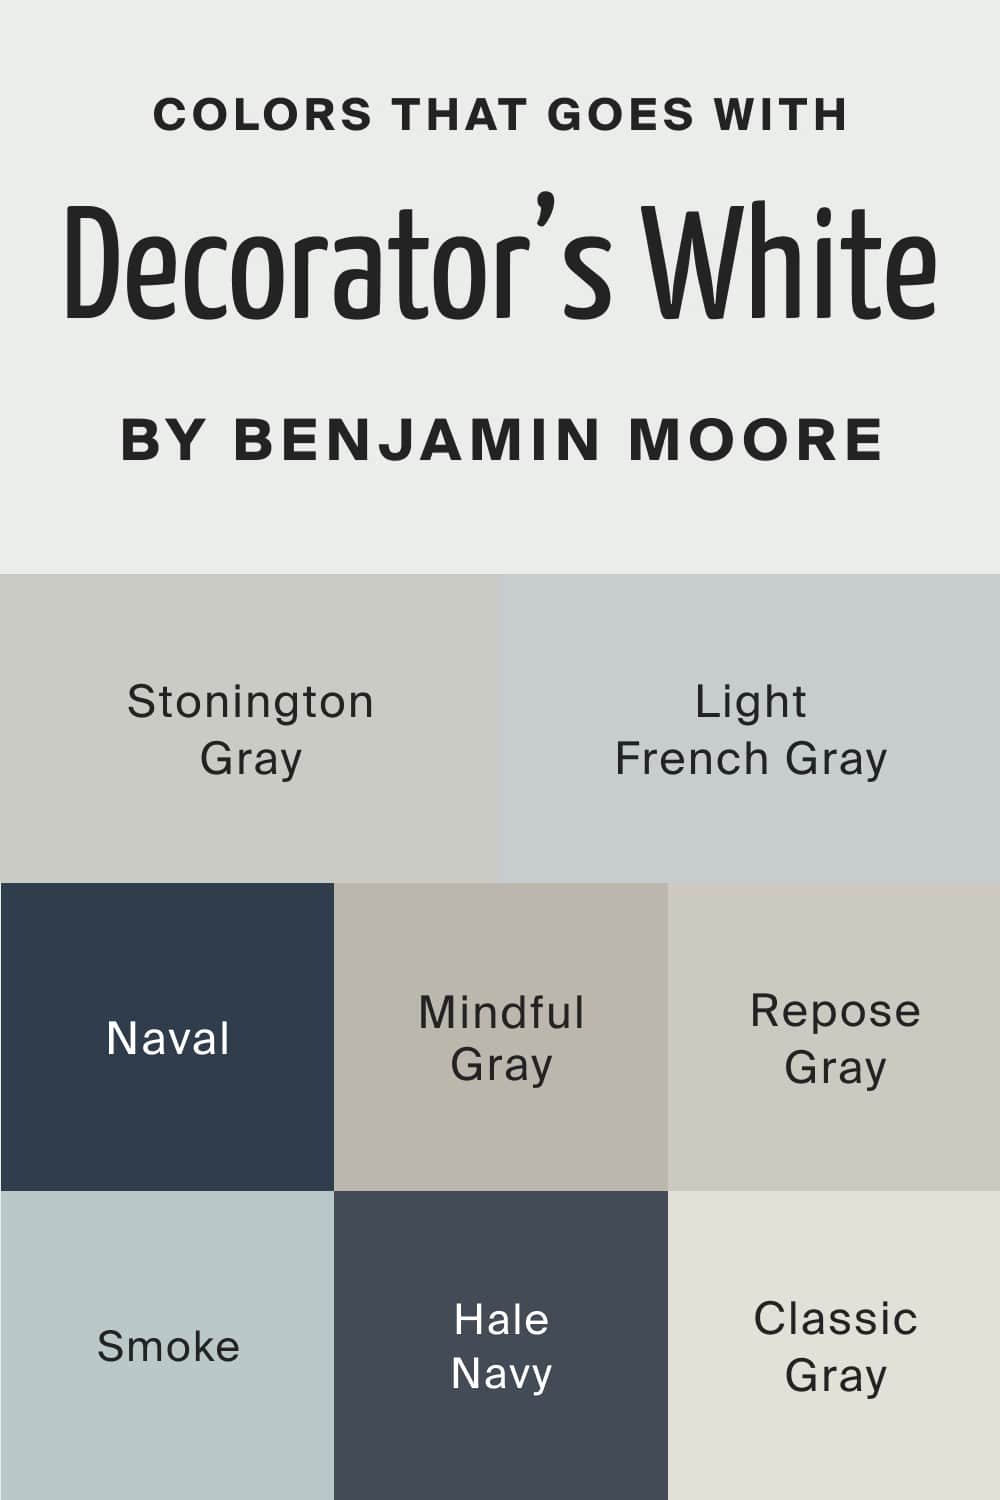 Colors that goes with Decorator’s White CC 20 by Benjamin Moore